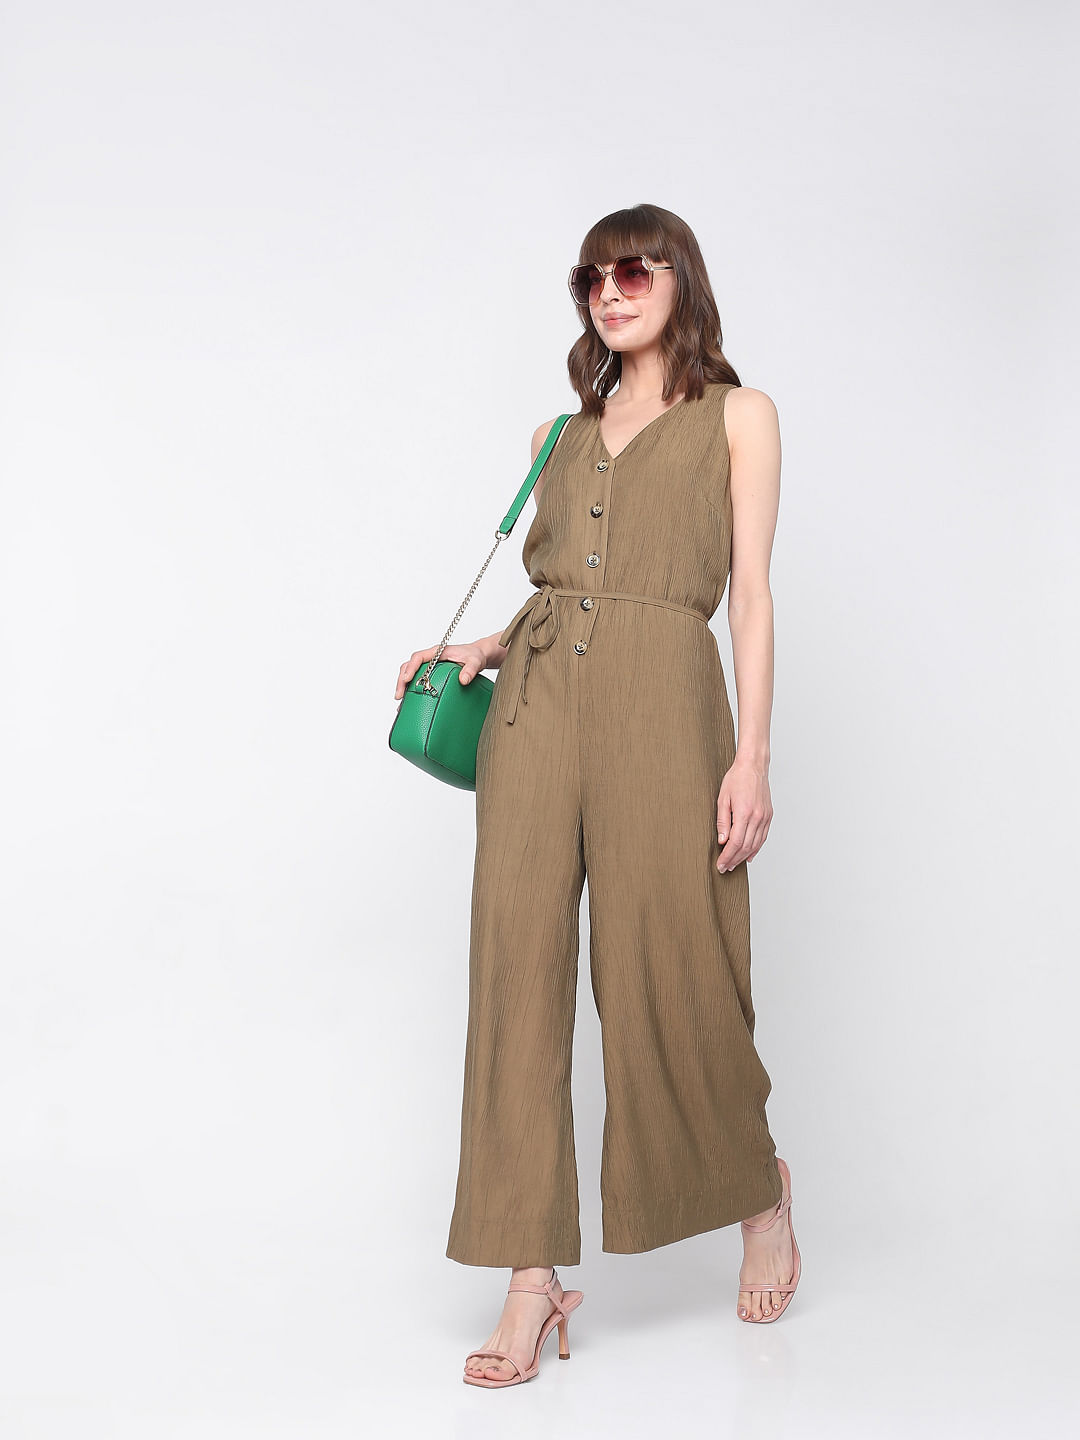 Blacky Dress Jumpsuit brown red Fashion Trousers Jumpsuits 